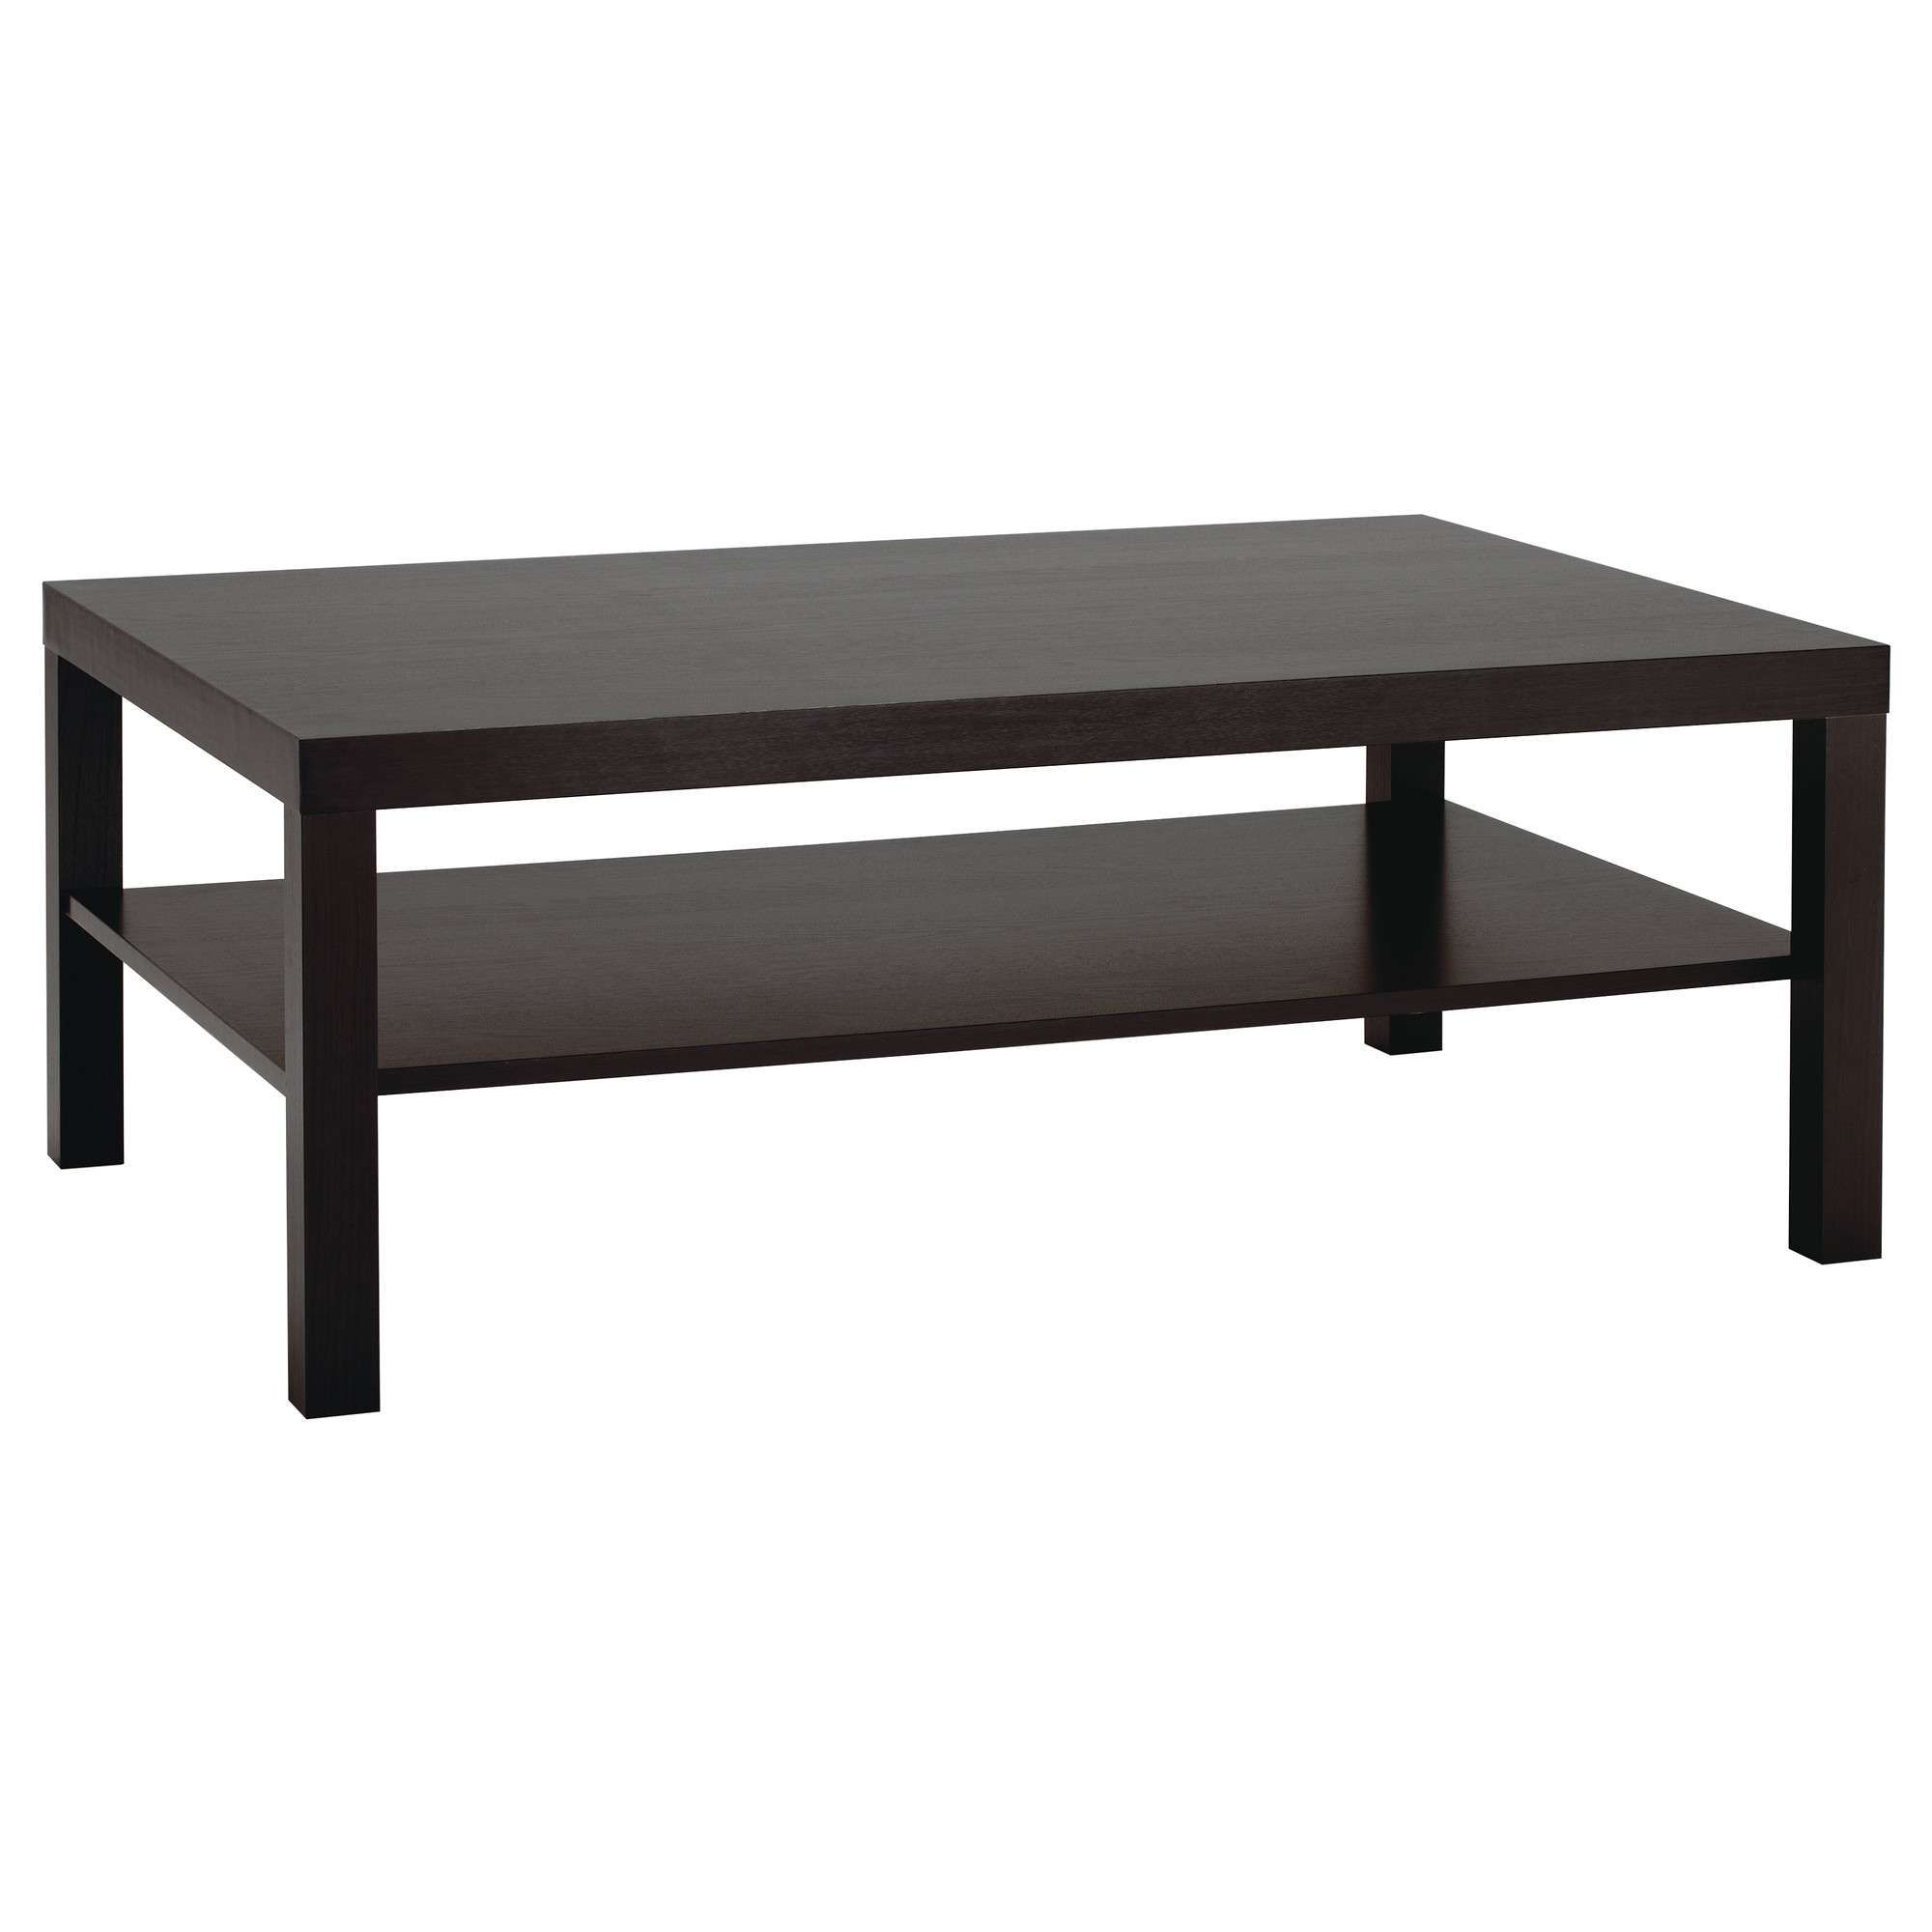 Lack Coffee Table – Black Brown – Ikea Inside Latest White And Black Coffee Tables (View 18 of 20)